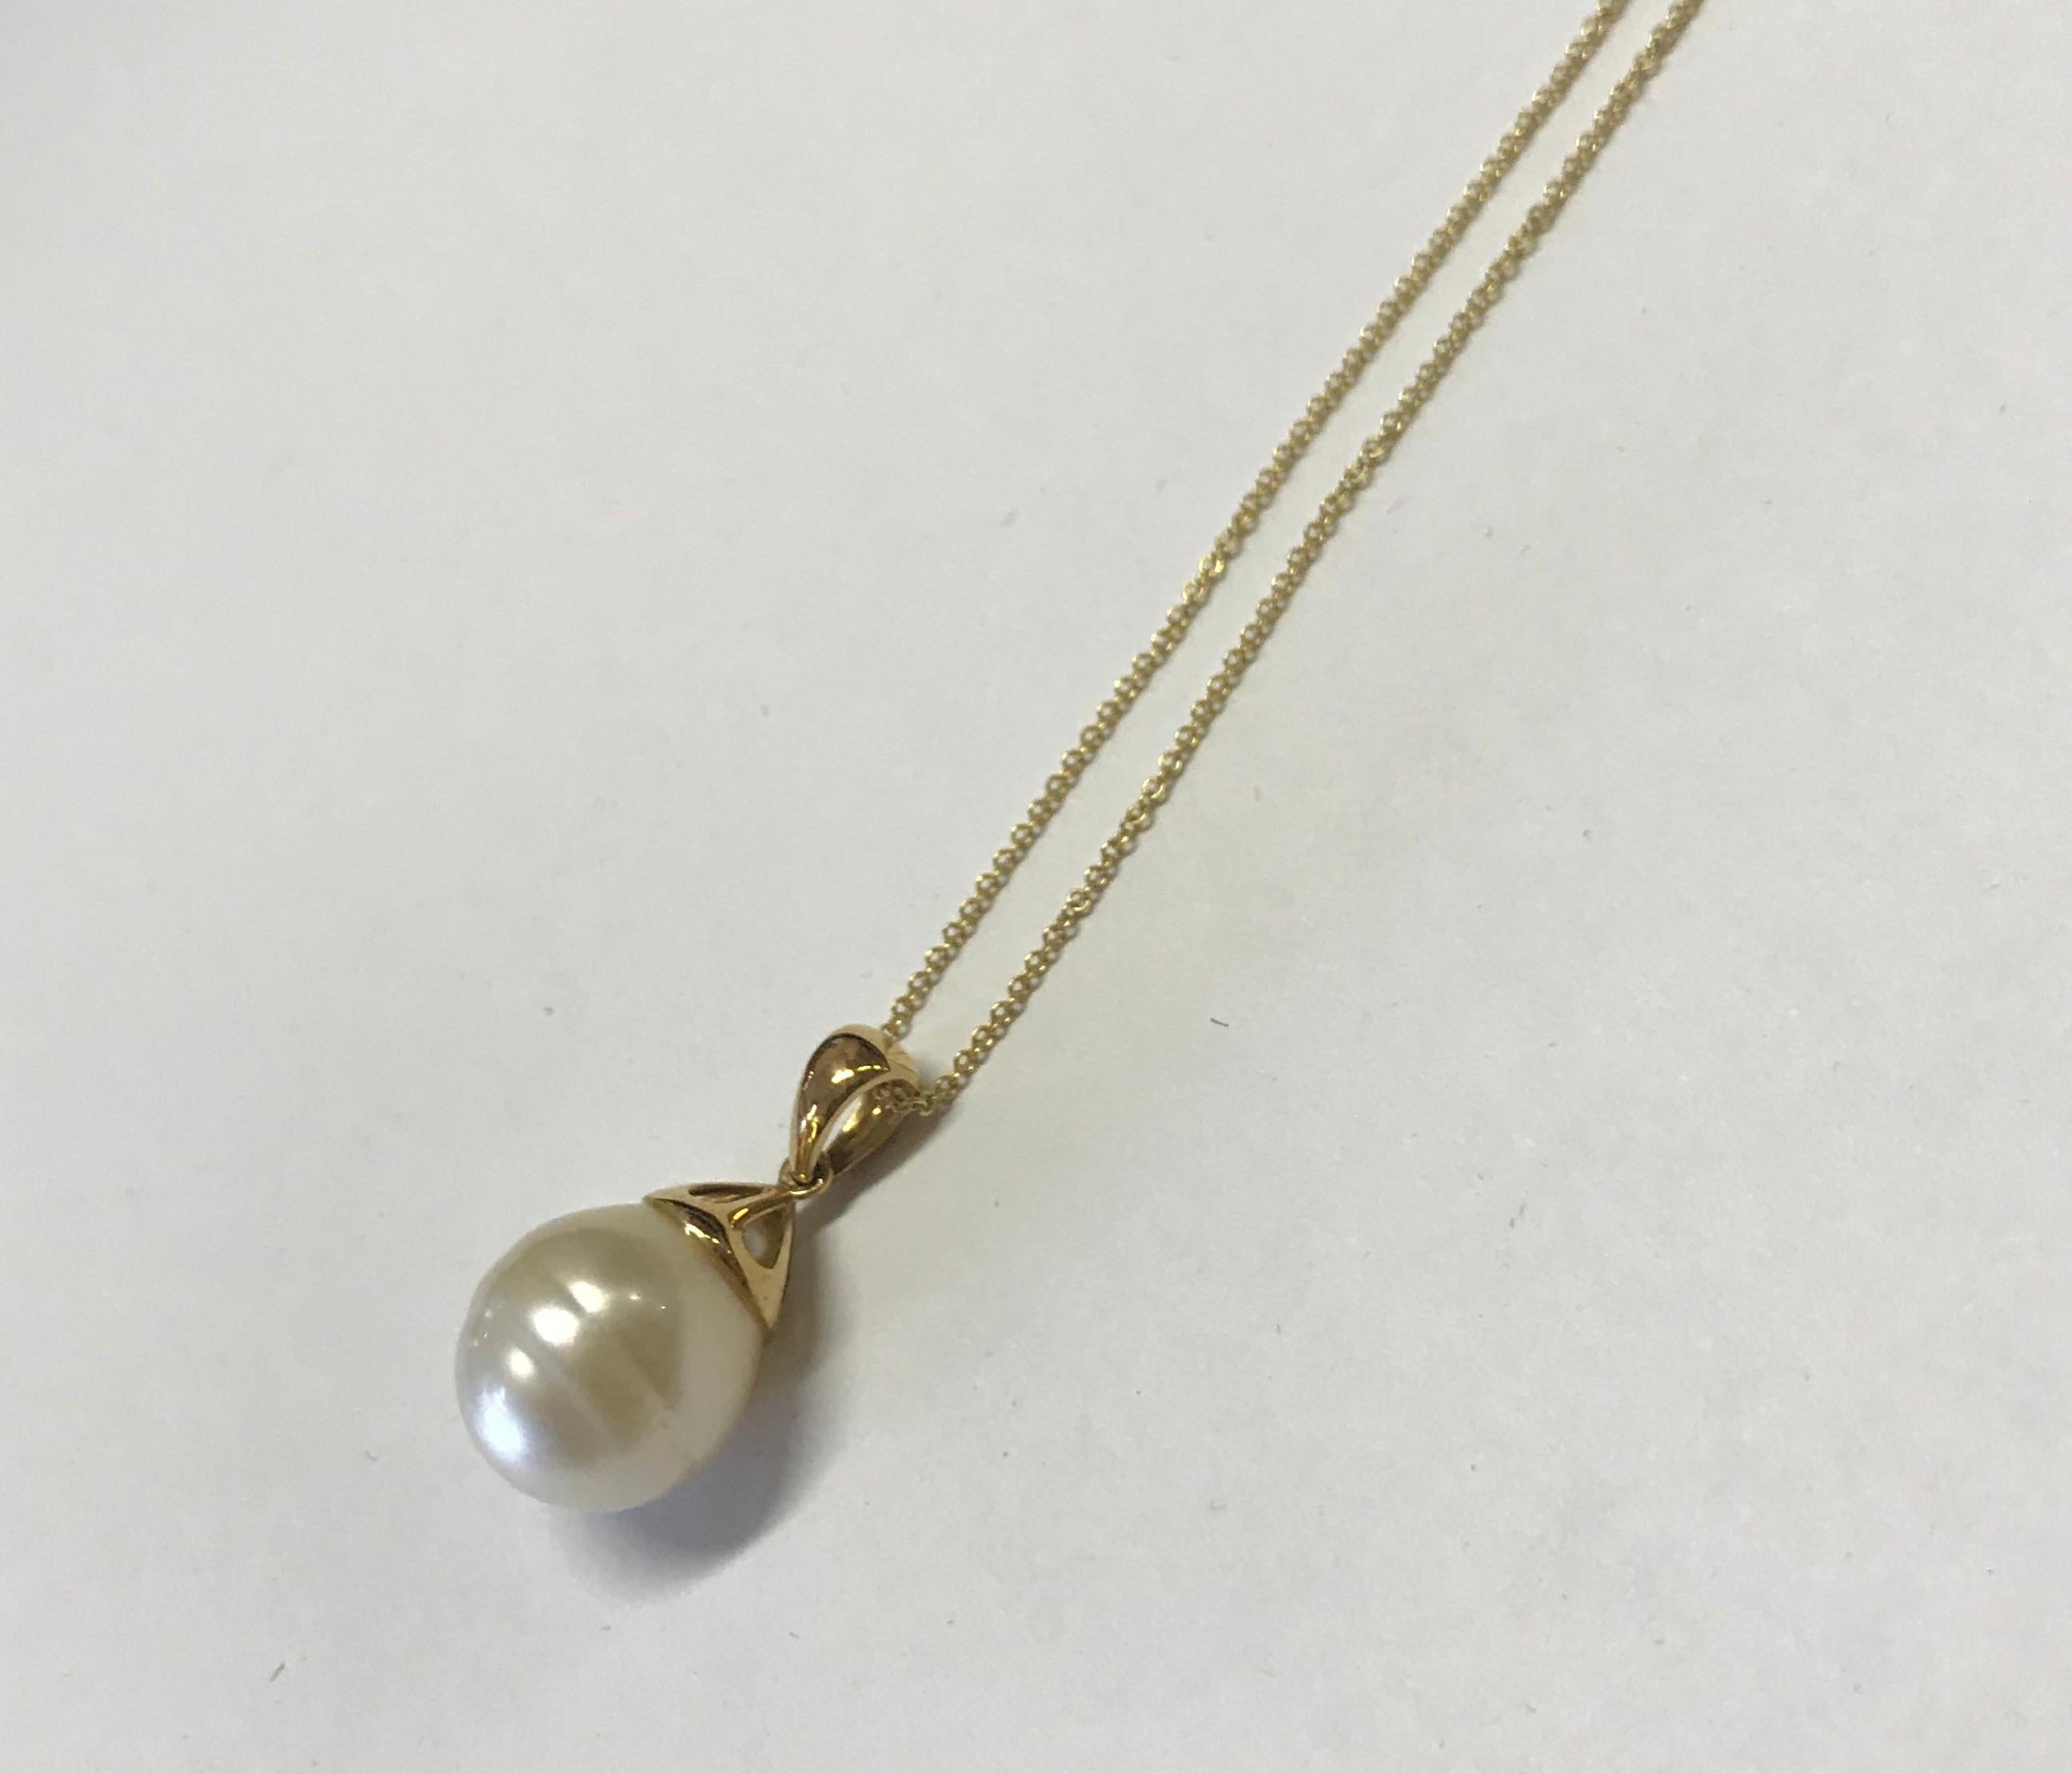 Material: 18K Yellow Gold
Center Stone Details: Pearl
Chain: 18 inches

Fine one-of-a-kind craftsmanship meets incredible quality in this breathtaking piece of jewelry.

All Alberto pieces are made in the U.S.A and include a lifetime